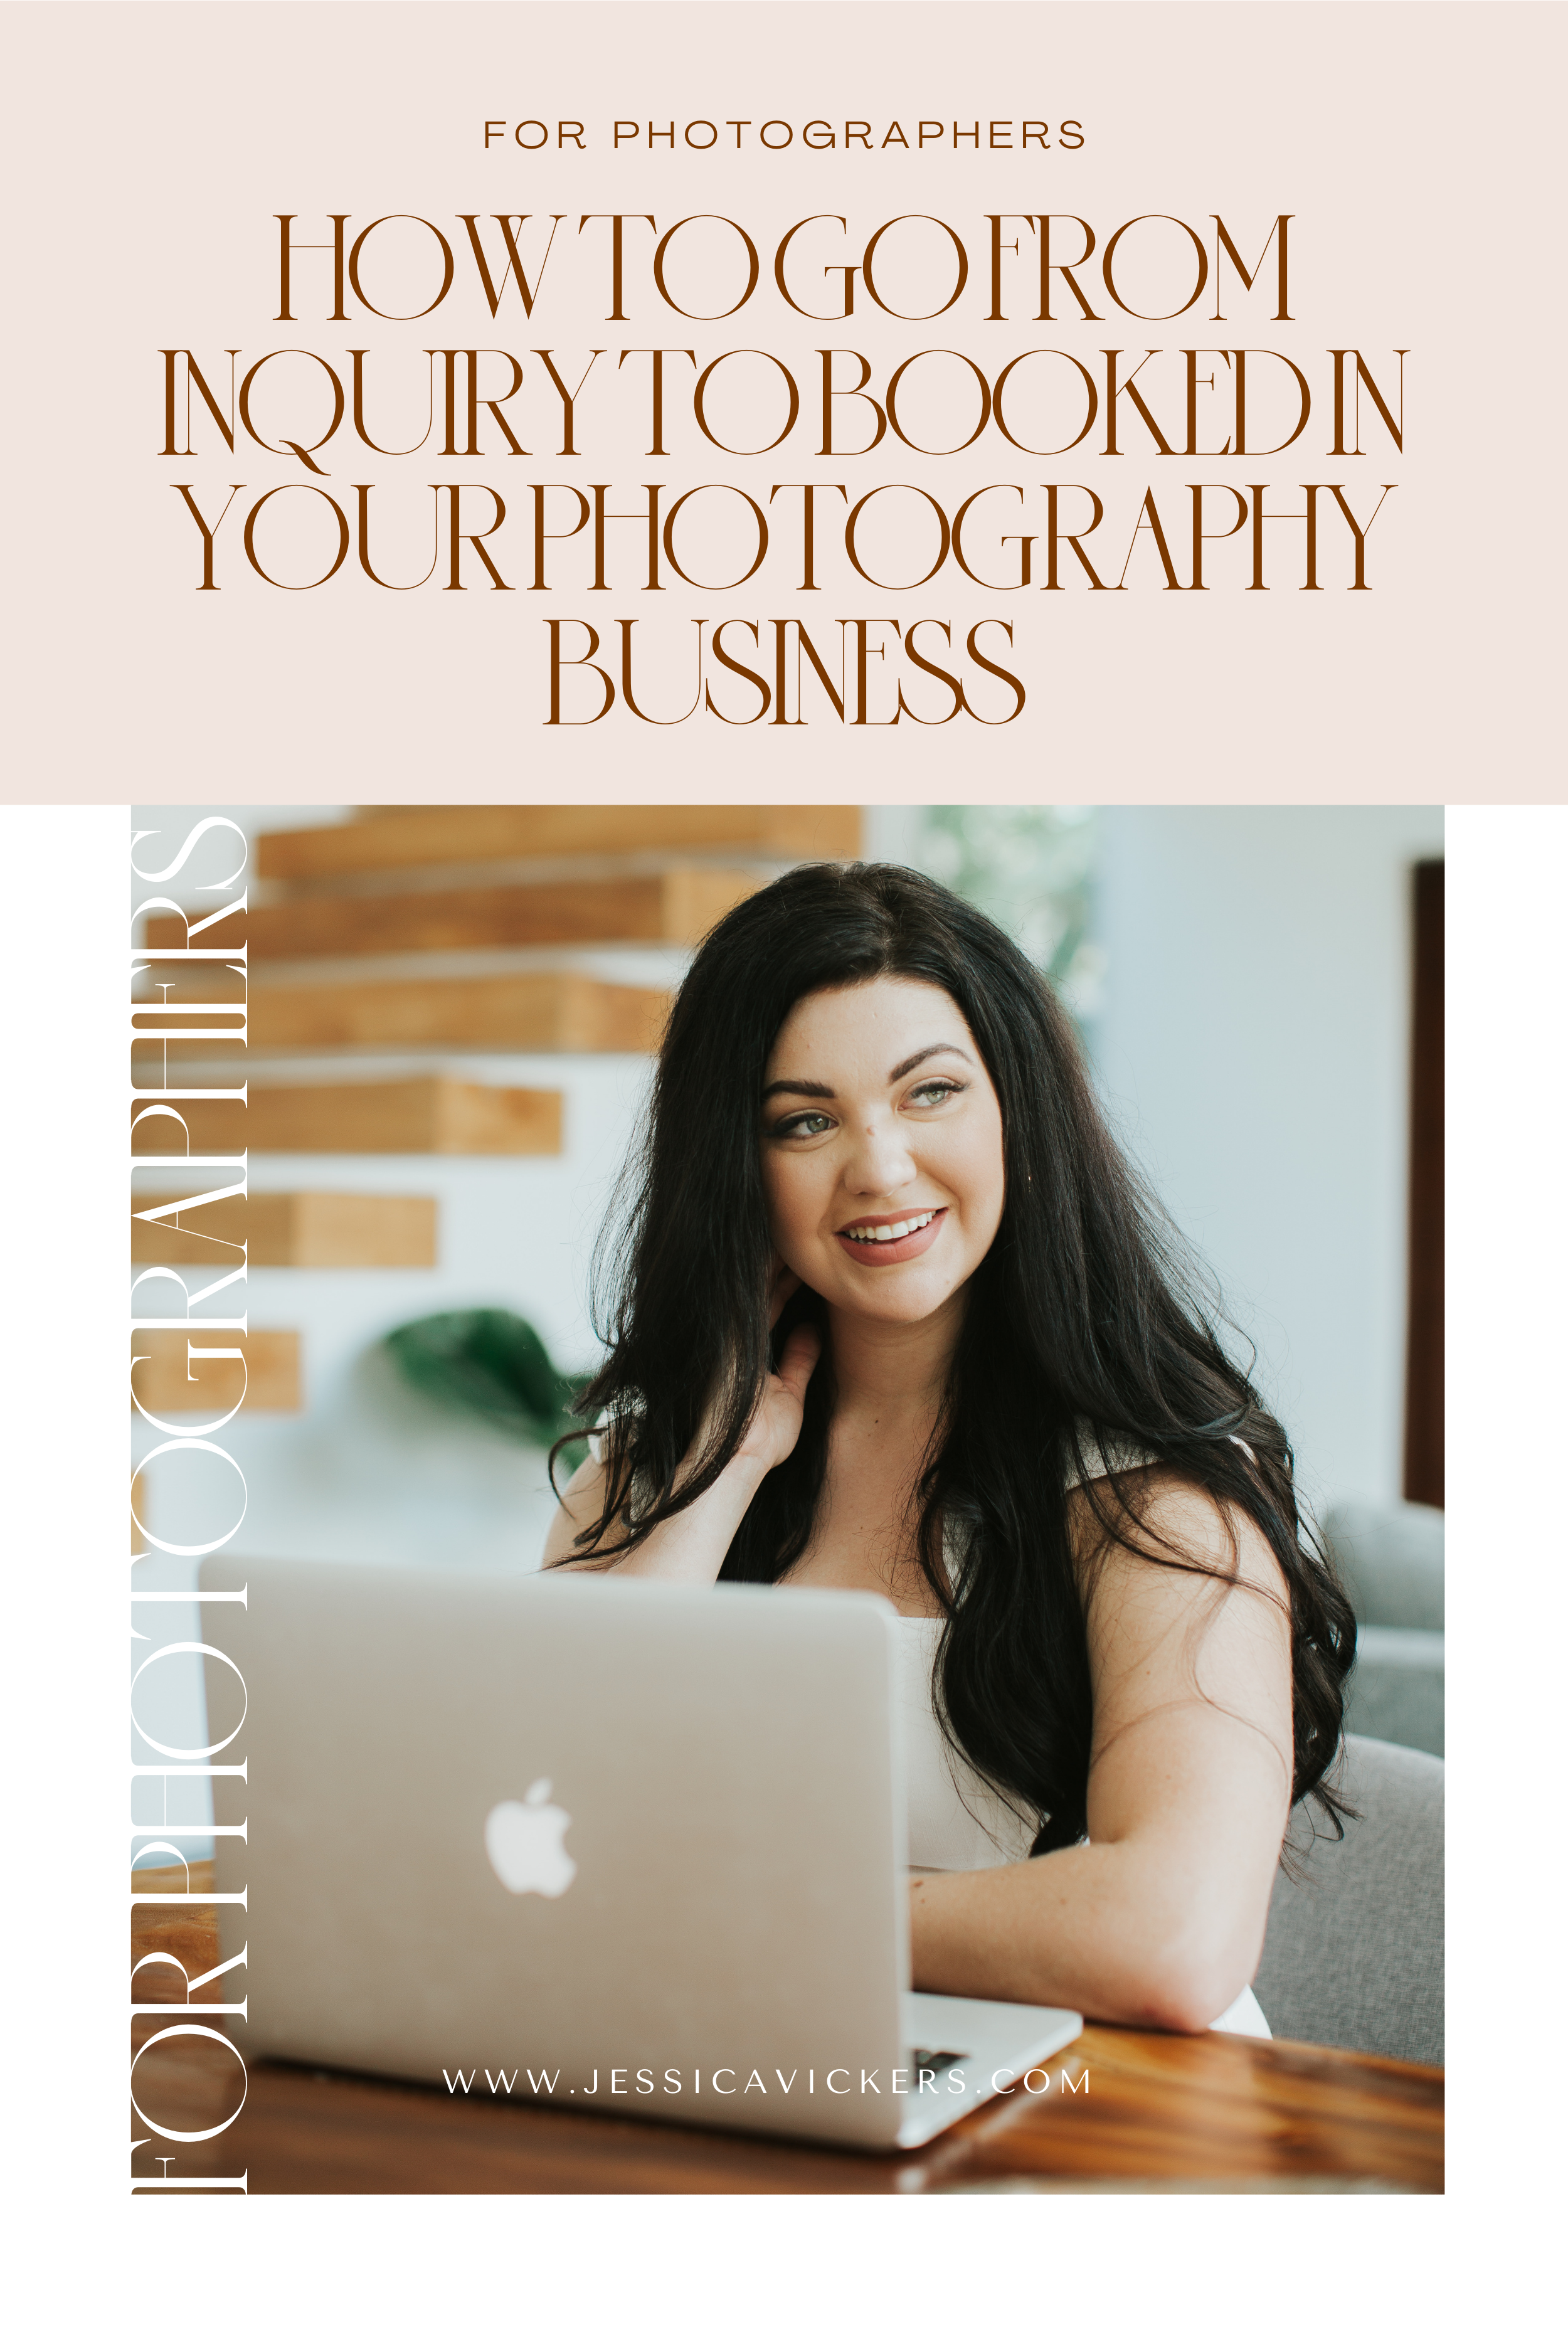 How to go from inquiry to booked in your photography business